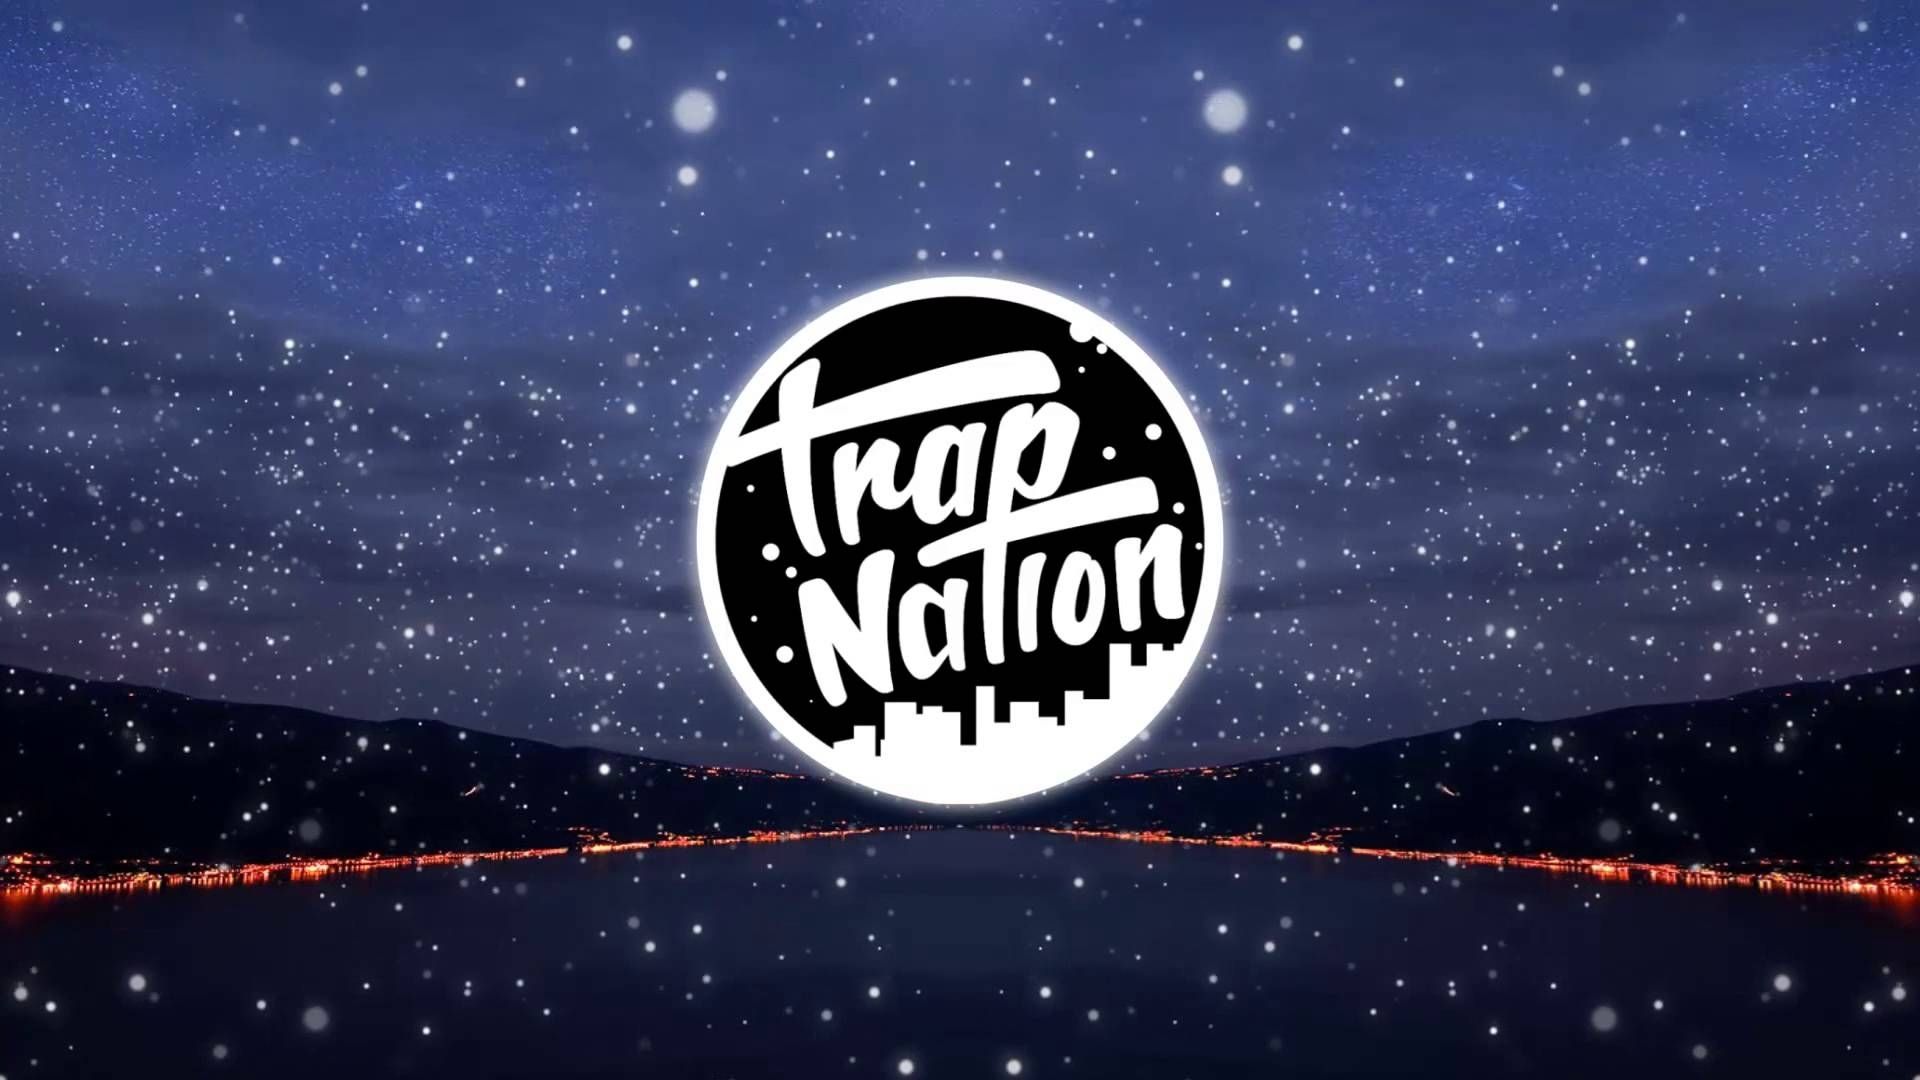 Trap Nation Wallpapers